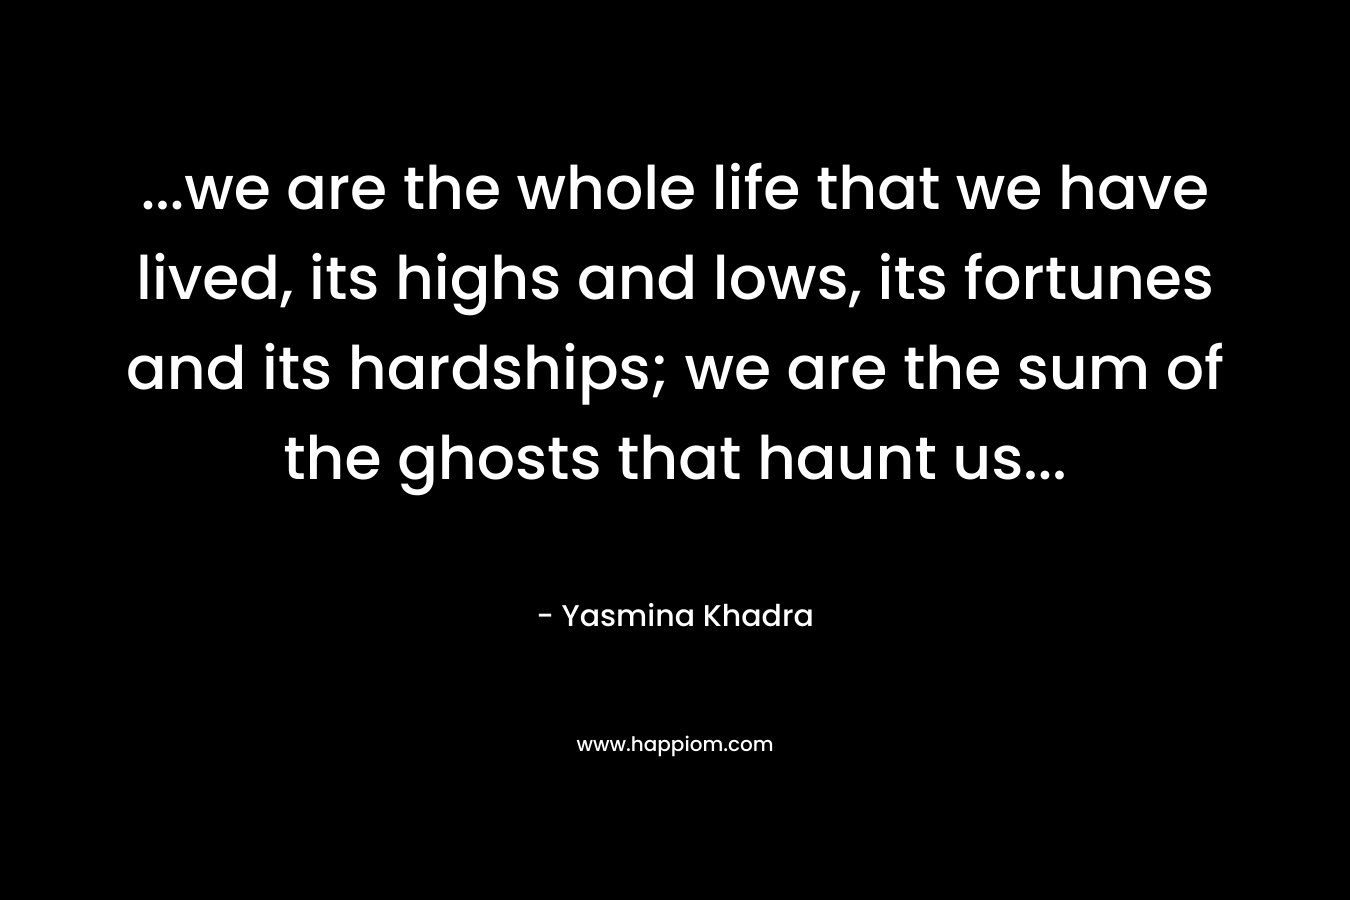 ...we are the whole life that we have lived, its highs and lows, its fortunes and its hardships; we are the sum of the ghosts that haunt us...